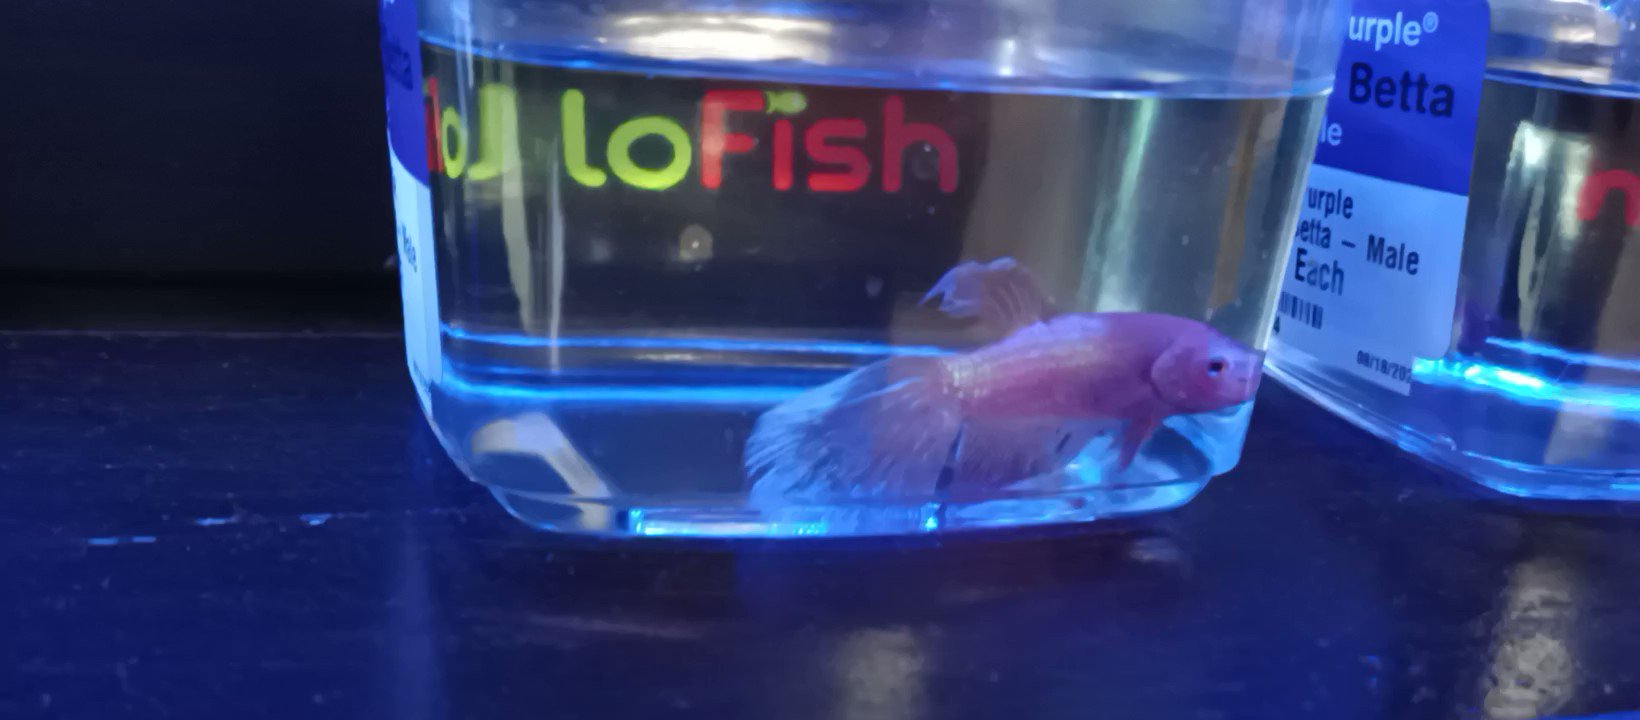 That Pet Place on X: NEW GLOFISH RELEASE!! Check out the brand